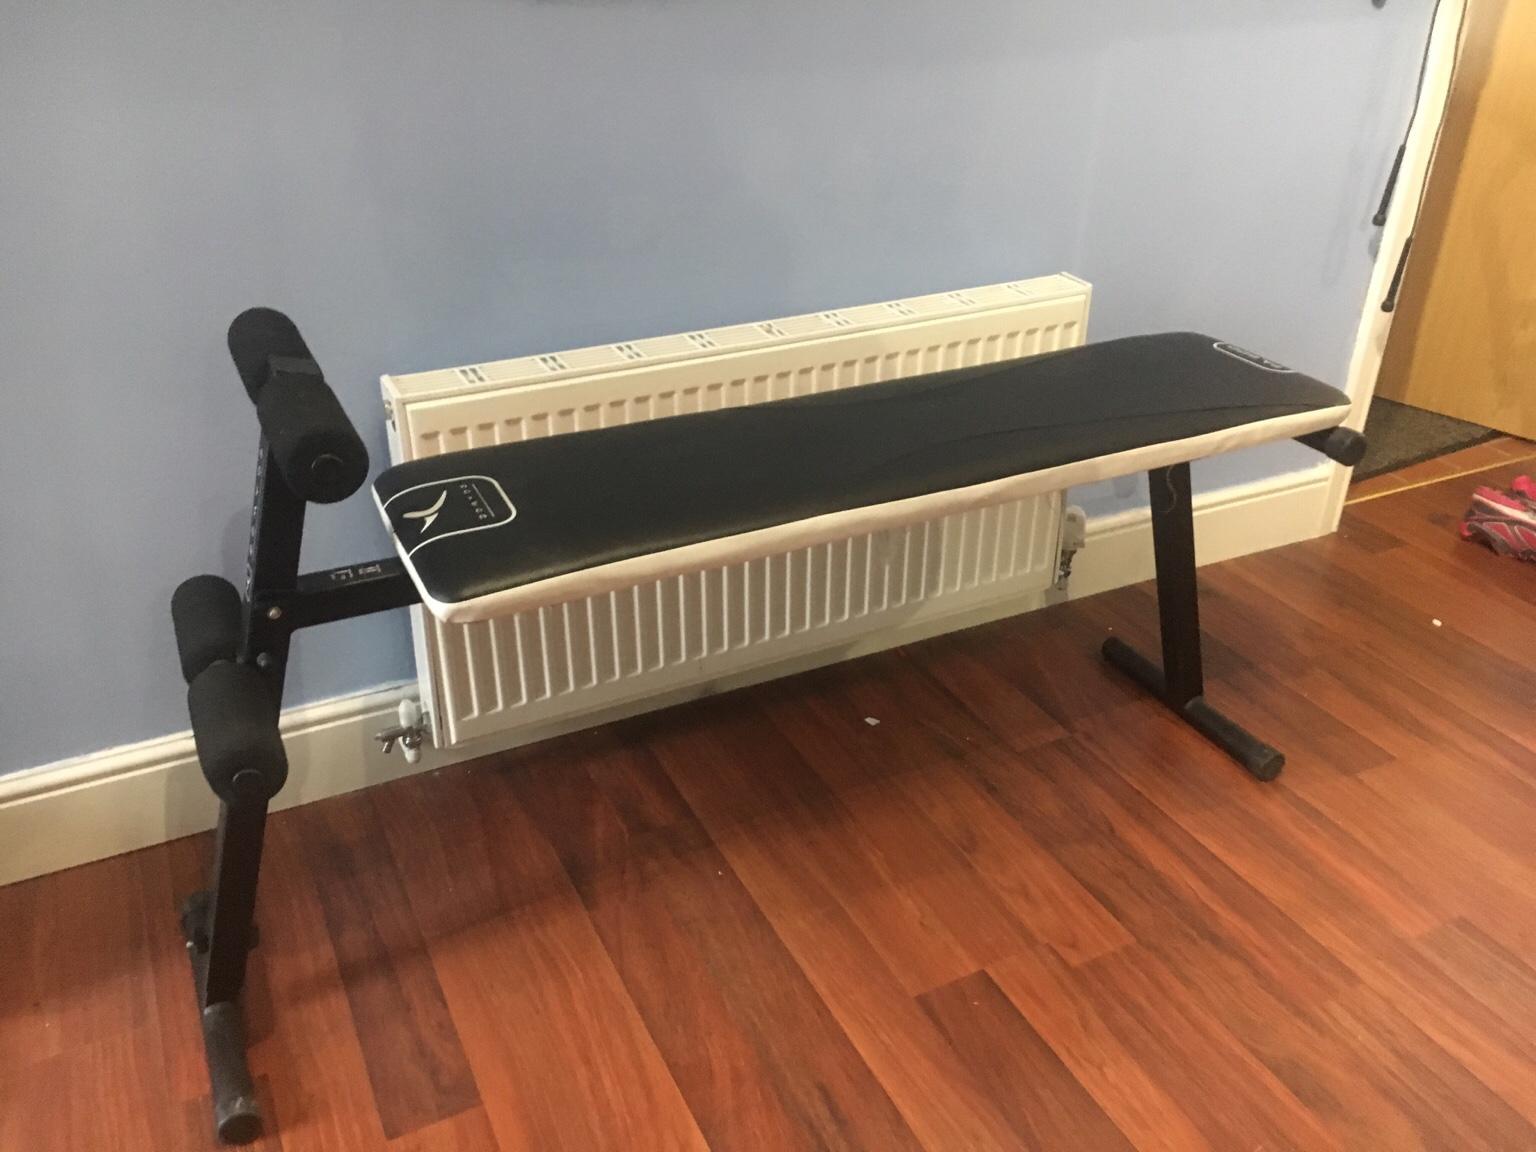 Abs / weights bench - Domyos PA600 in 